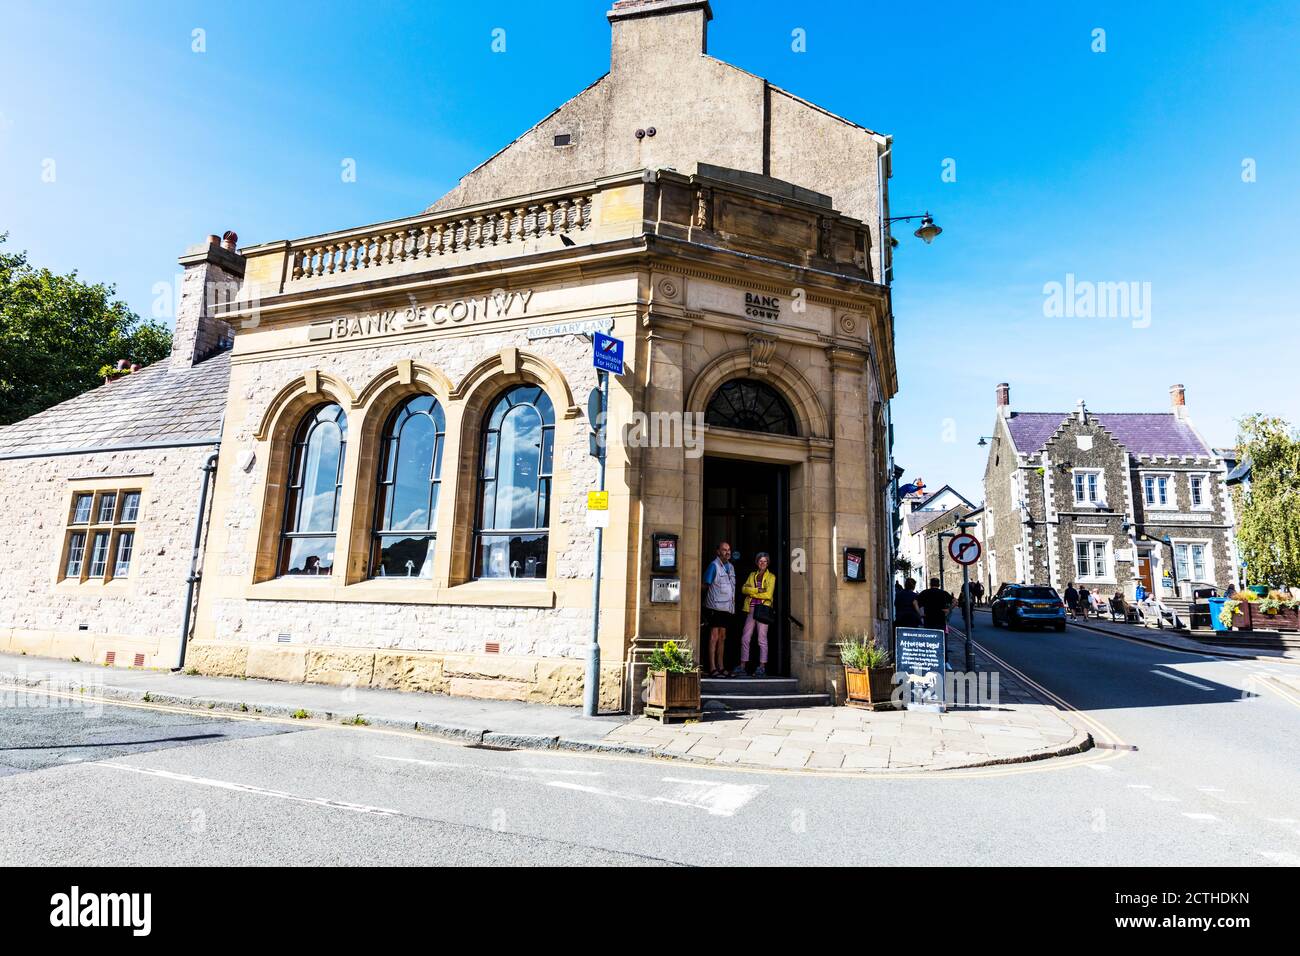 Bank of Conwy is a bar in Conwy Town Centre, Conwy, Conwy town, Conwy Wales, Wales, North Wales, UK, Bank of Conwy, bar, pub, building, sign, exterior Stock Photo